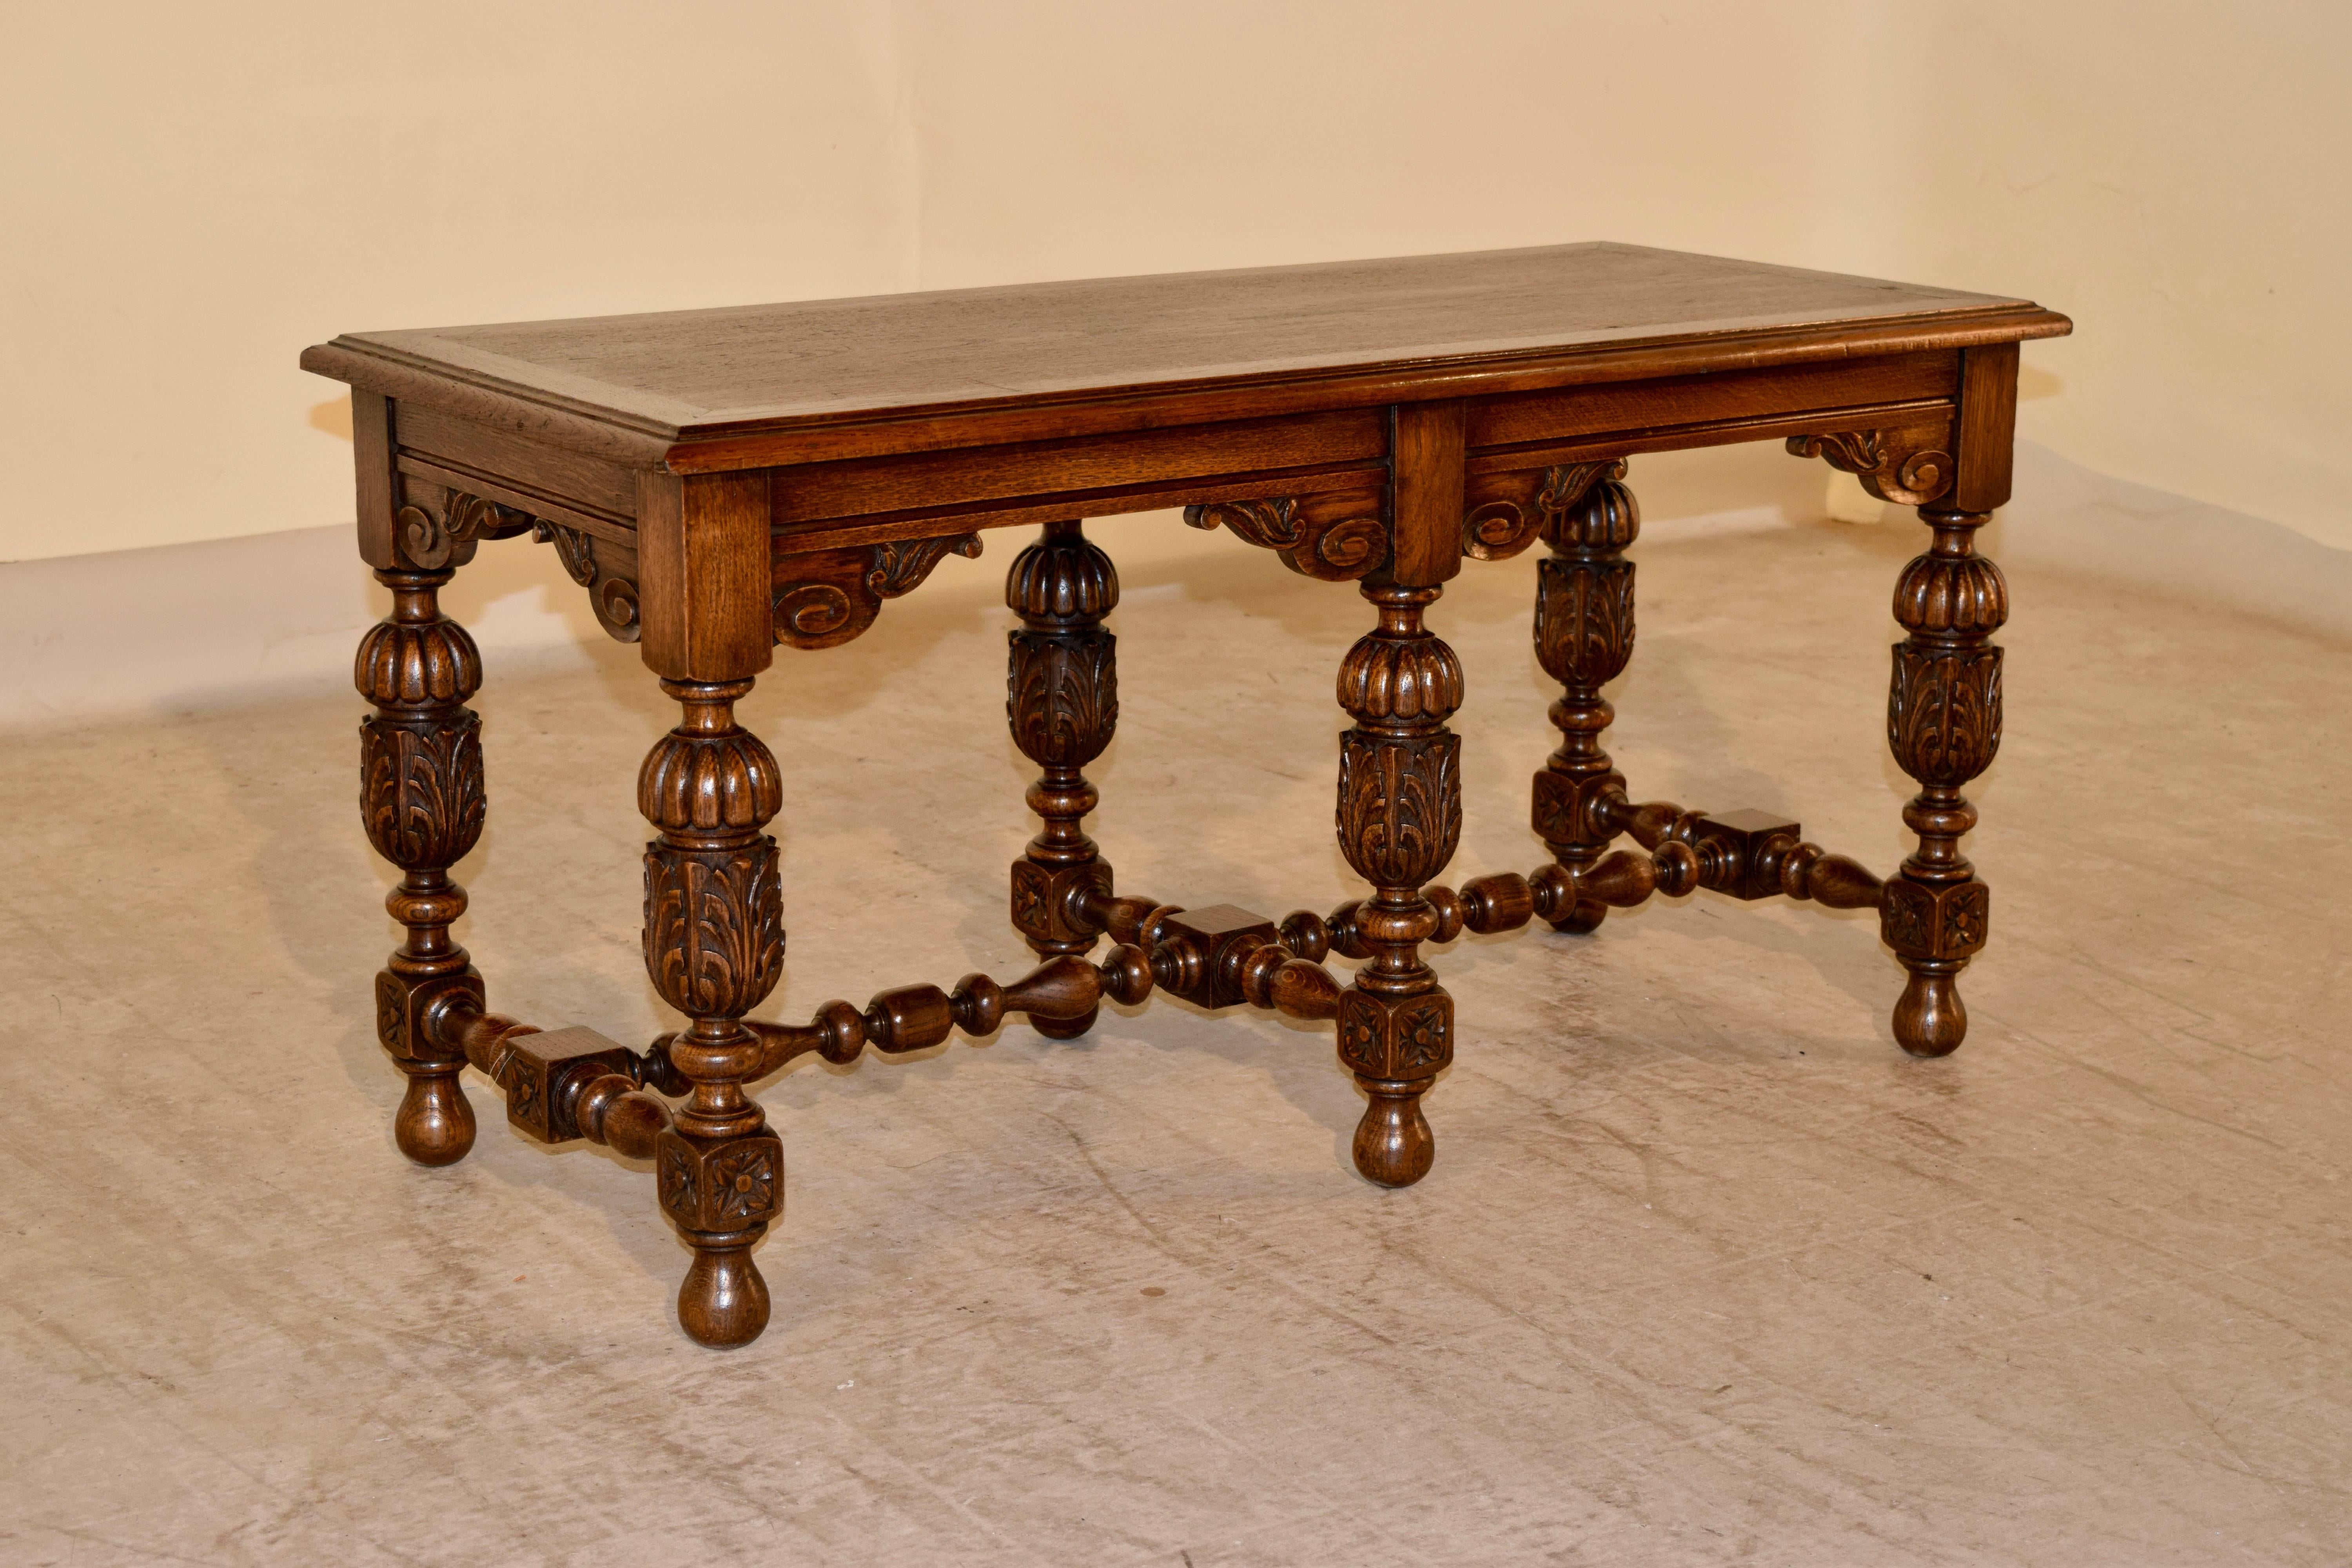 19th century English oak bench with a lovely beveled edge around the top, following down to a routed apron with hand-carved brackets. The legs are wonderfully hand-turned and carved decorated and are joined by hand-turned stretchers. Supported on